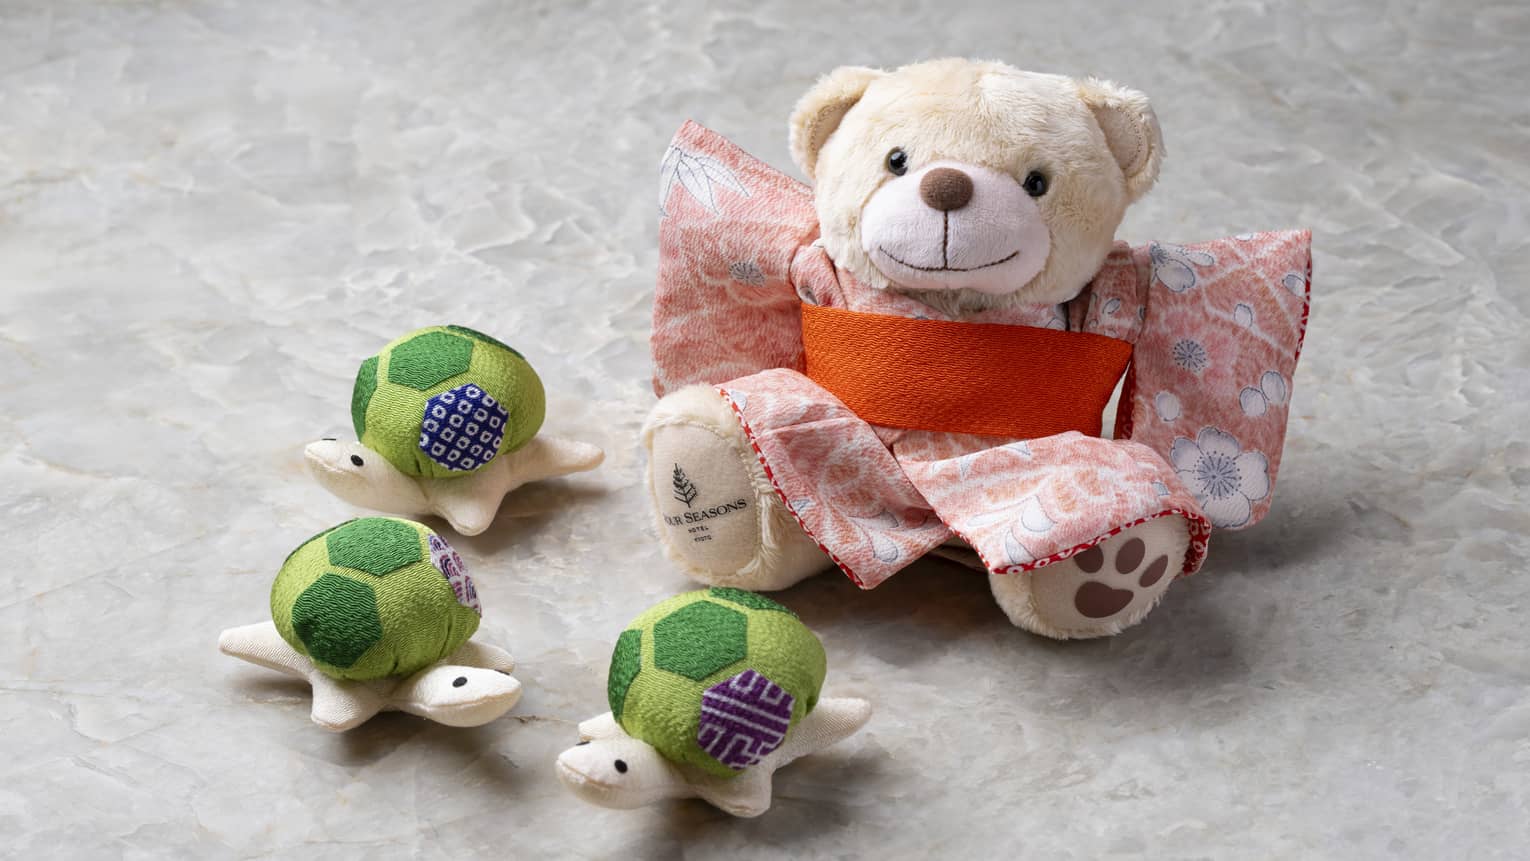 Cream-coloured stuffed bear in kimono and three stuffed turtles with green patterned shells